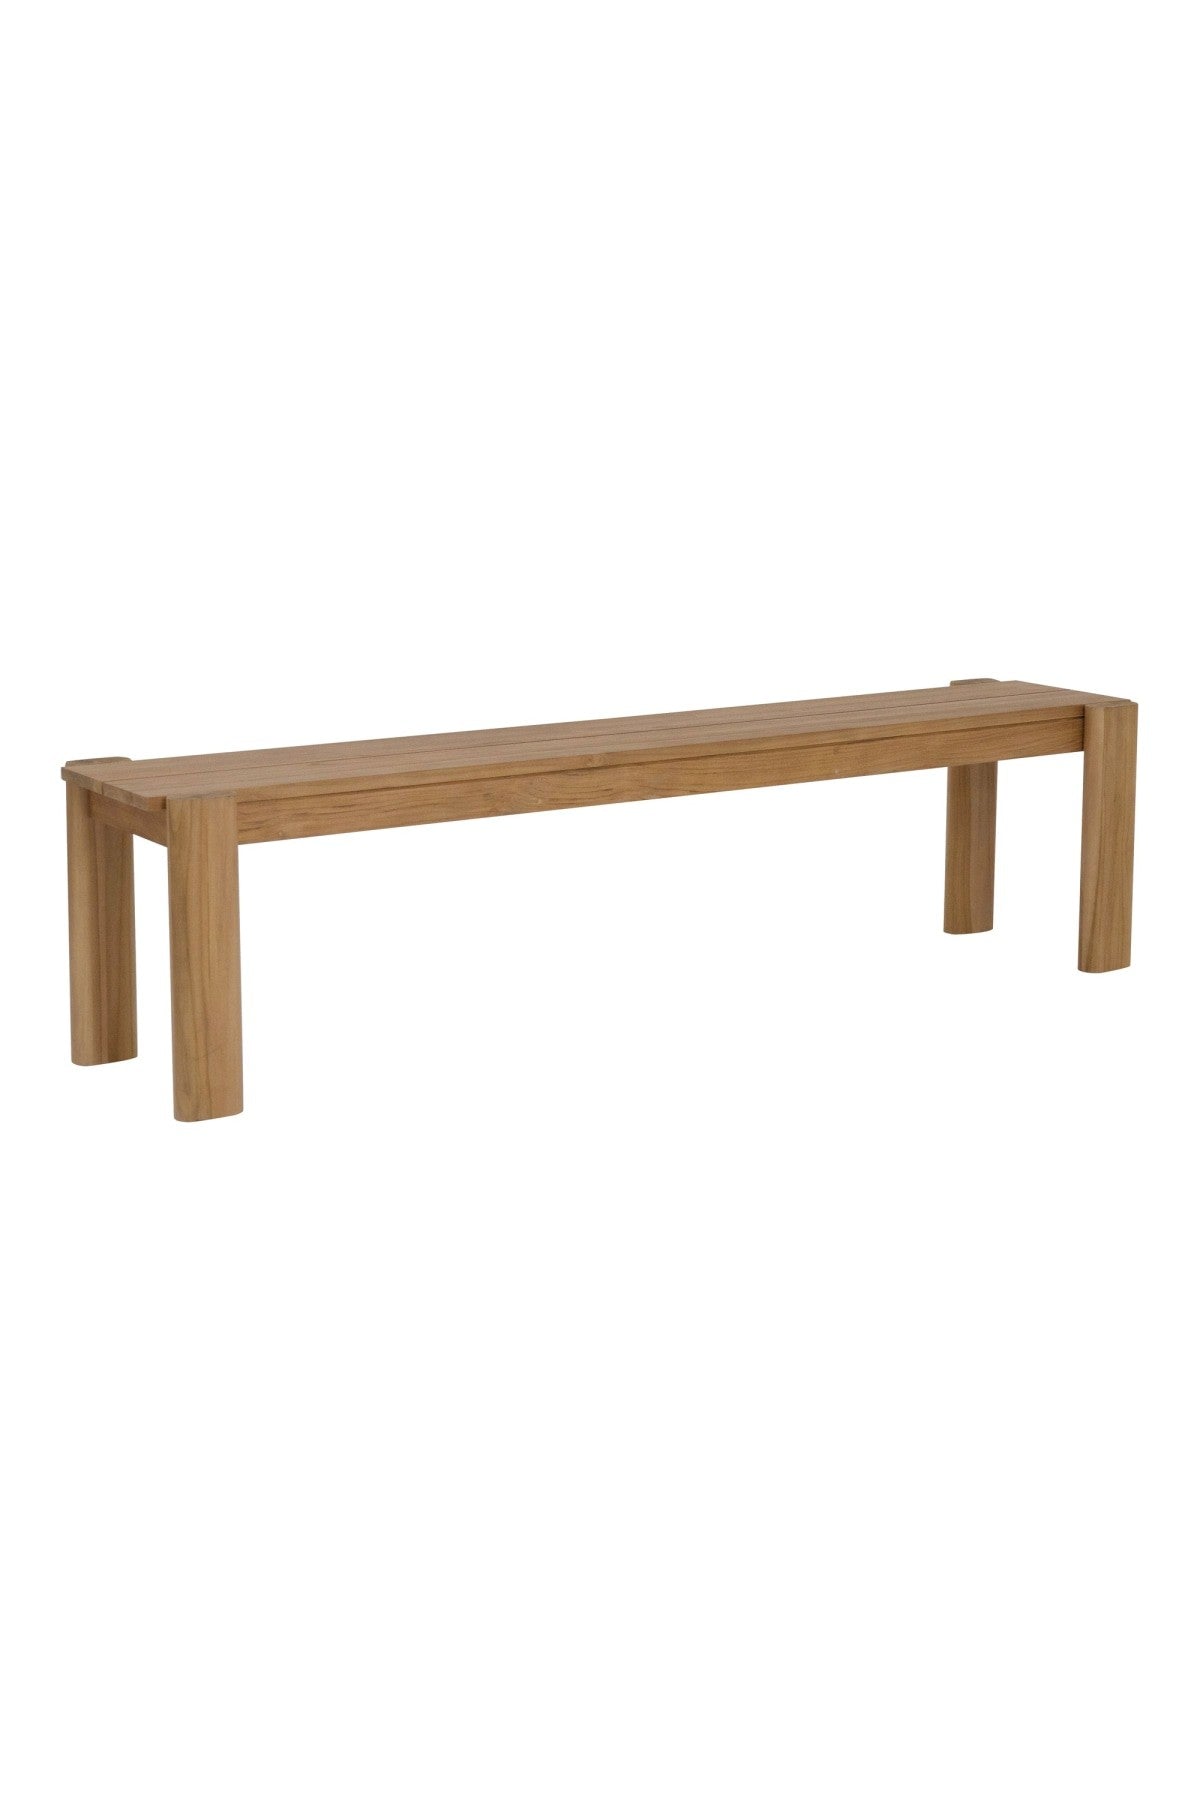 Temple Outdoor Dining Bench